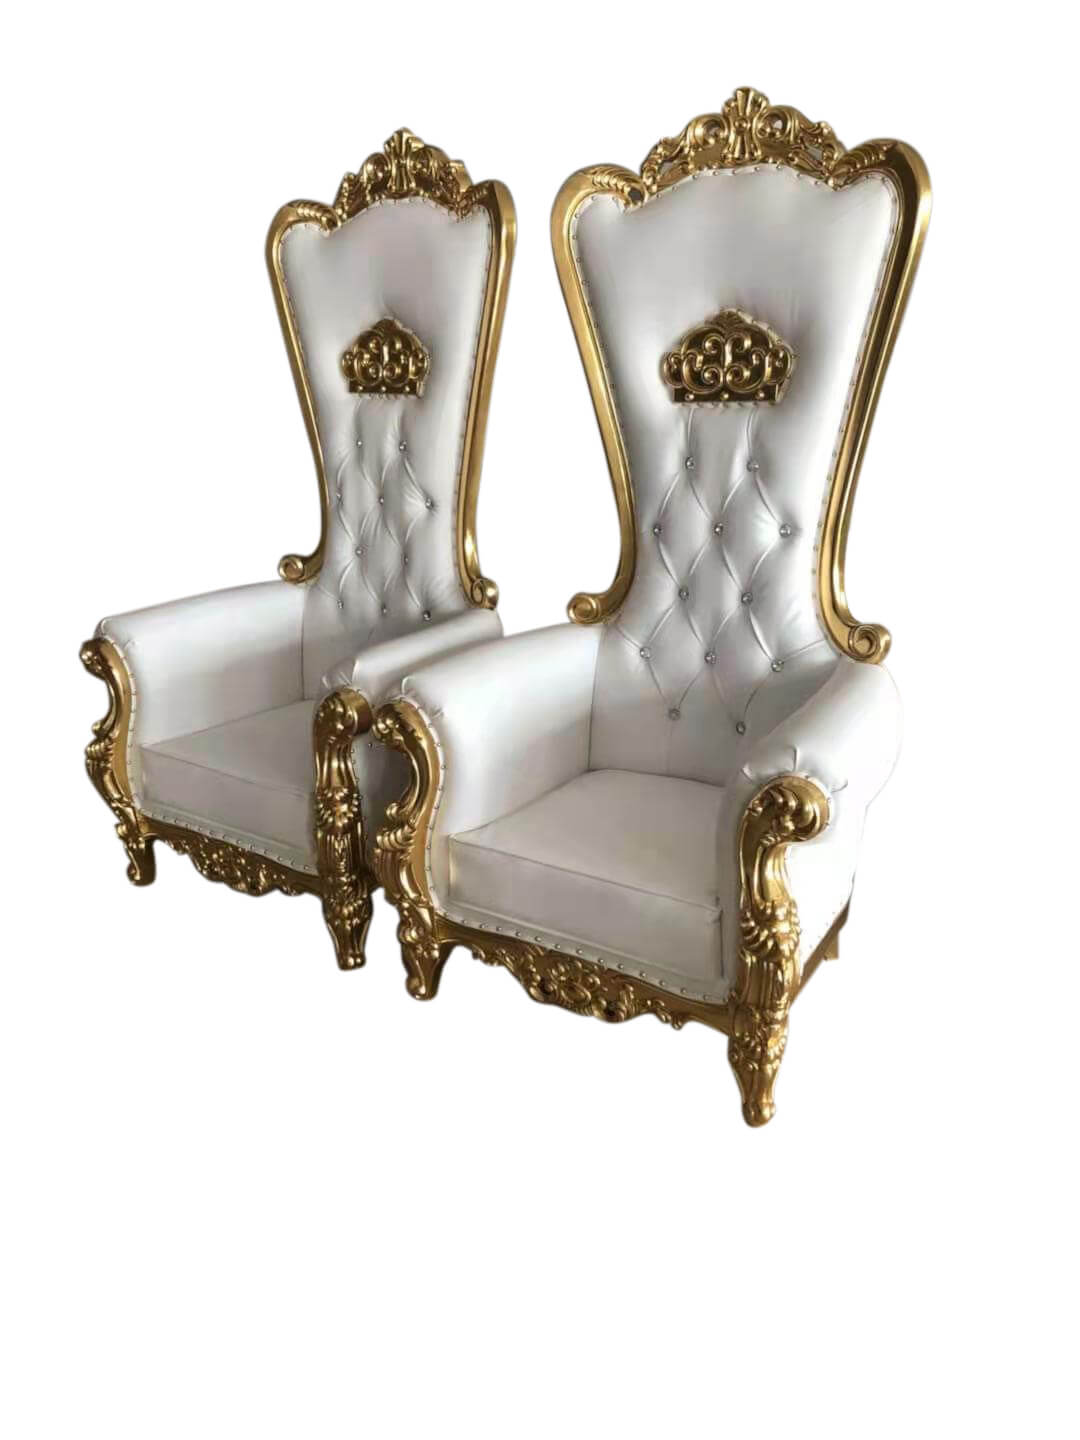 Wooden Royal Throne Chairs Wholesale